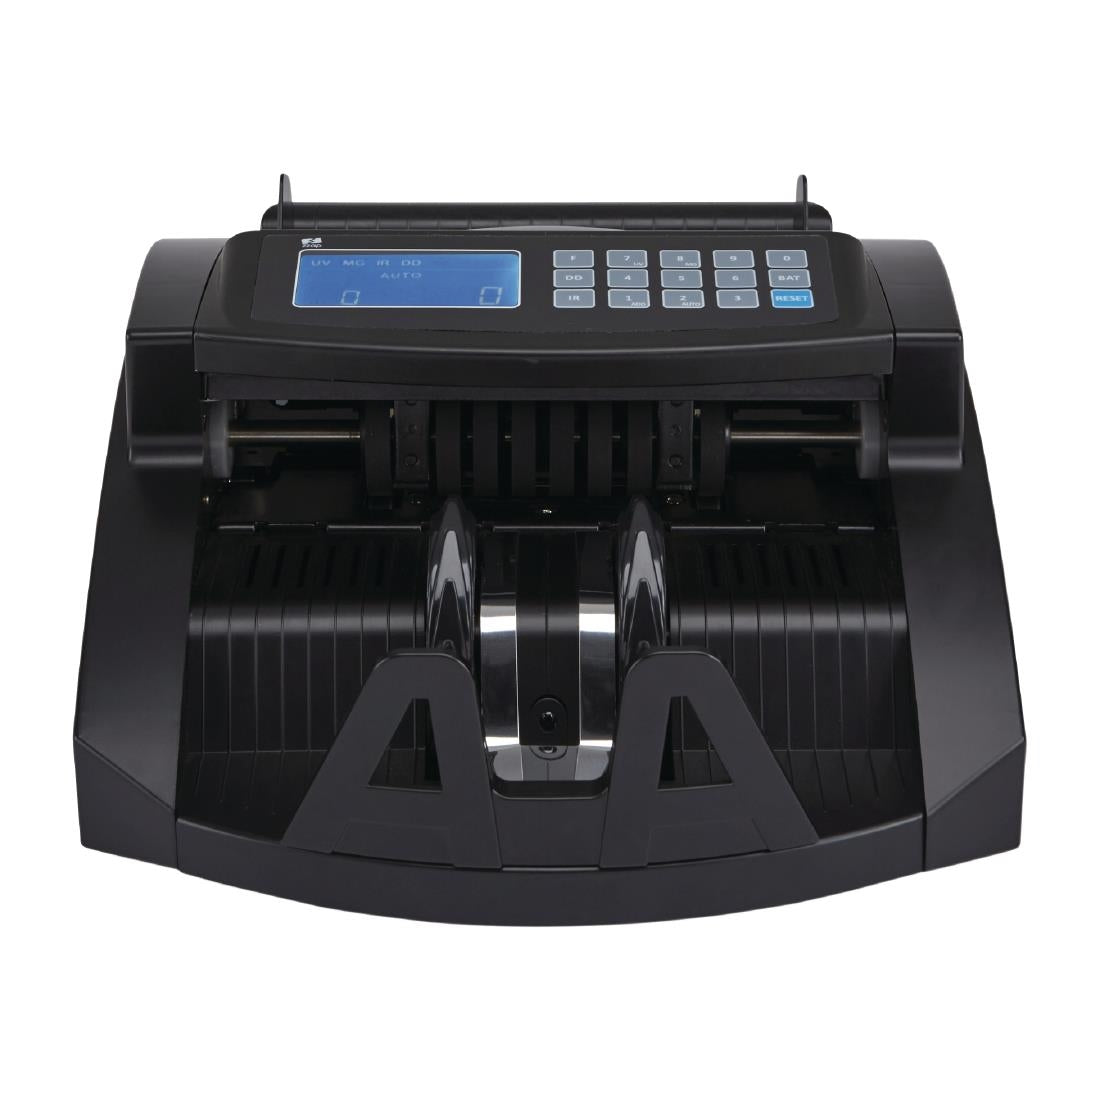 ZZap NC20i Banknote Counter